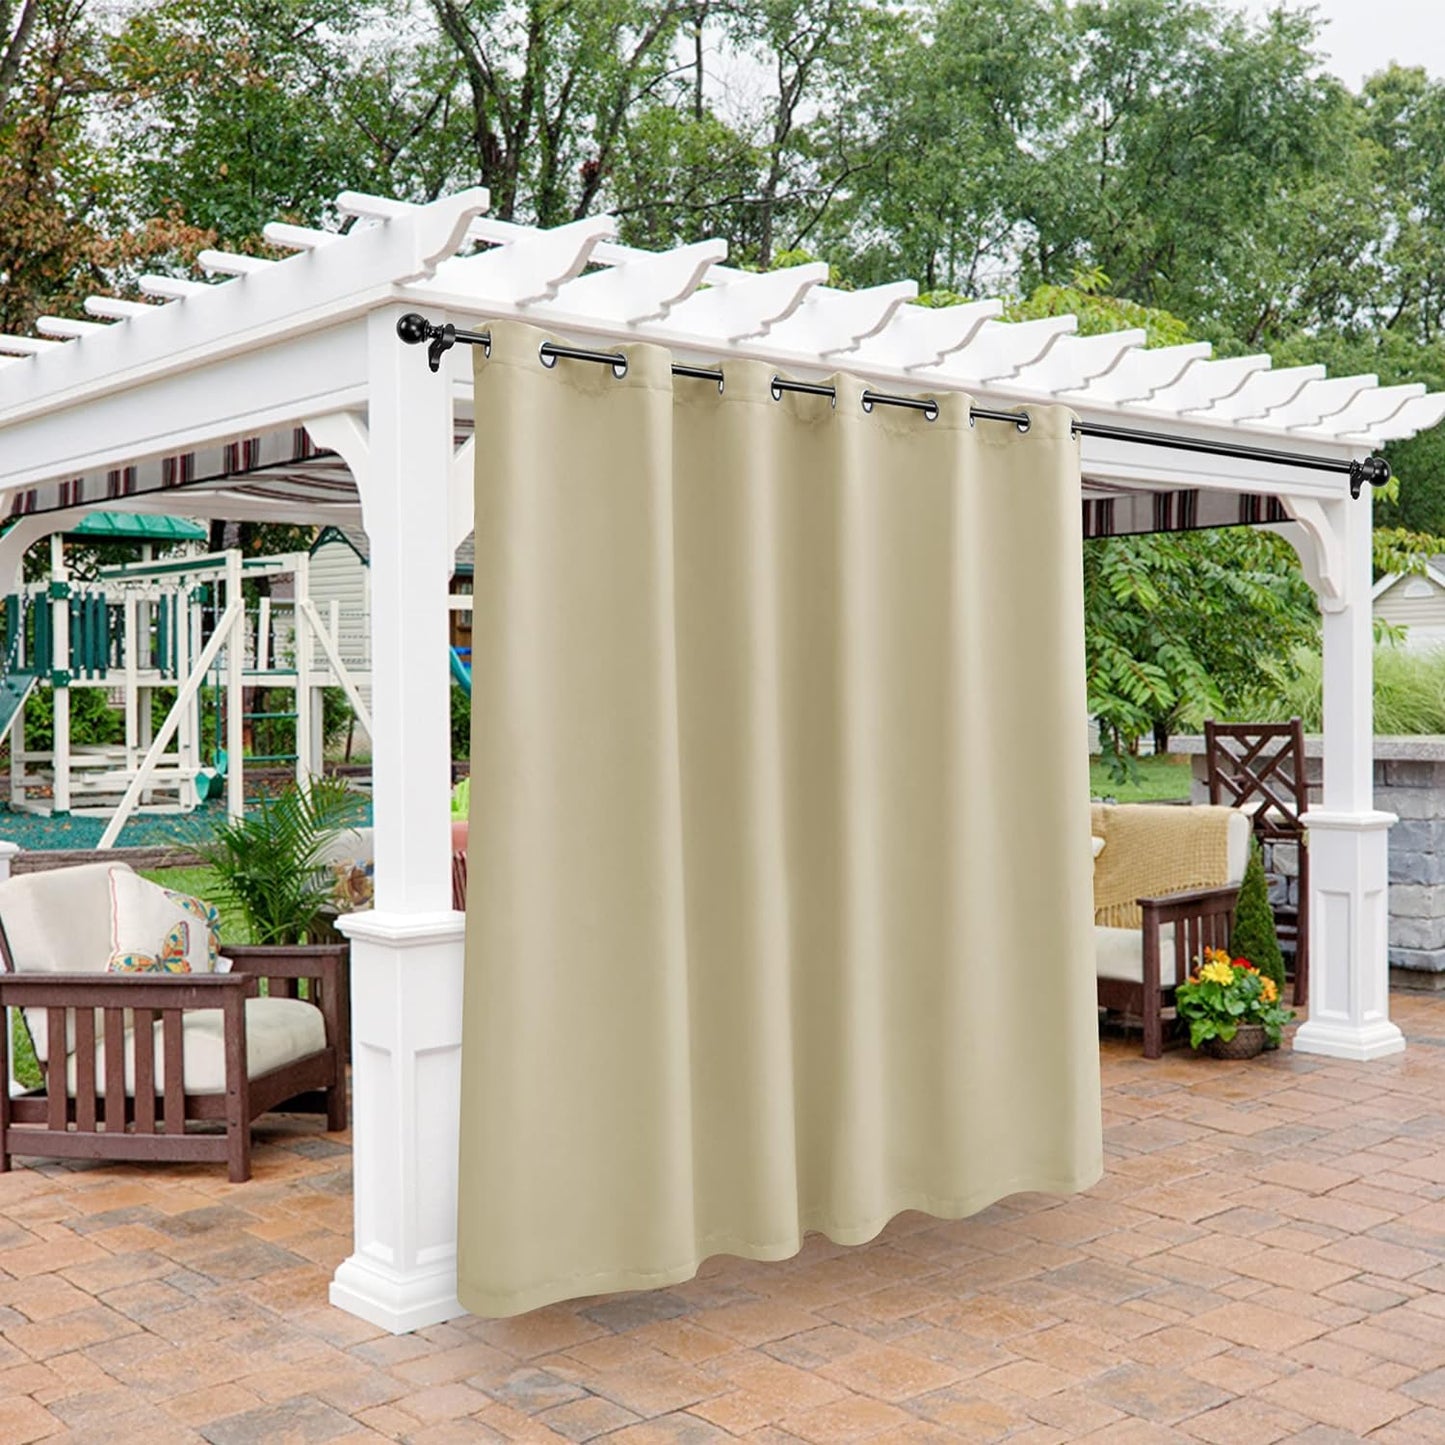 BONZER Outdoor Curtains for Patio Waterproof - Light Blocking Weather Resistant Privacy Grommet Blackout Curtains for Gazebo, Porch, Pergola, Cabana, Deck, Sunroom, 1 Panel, 52W X 84L Inch, Silver  BONZER Cream 100W X 95 Inch 